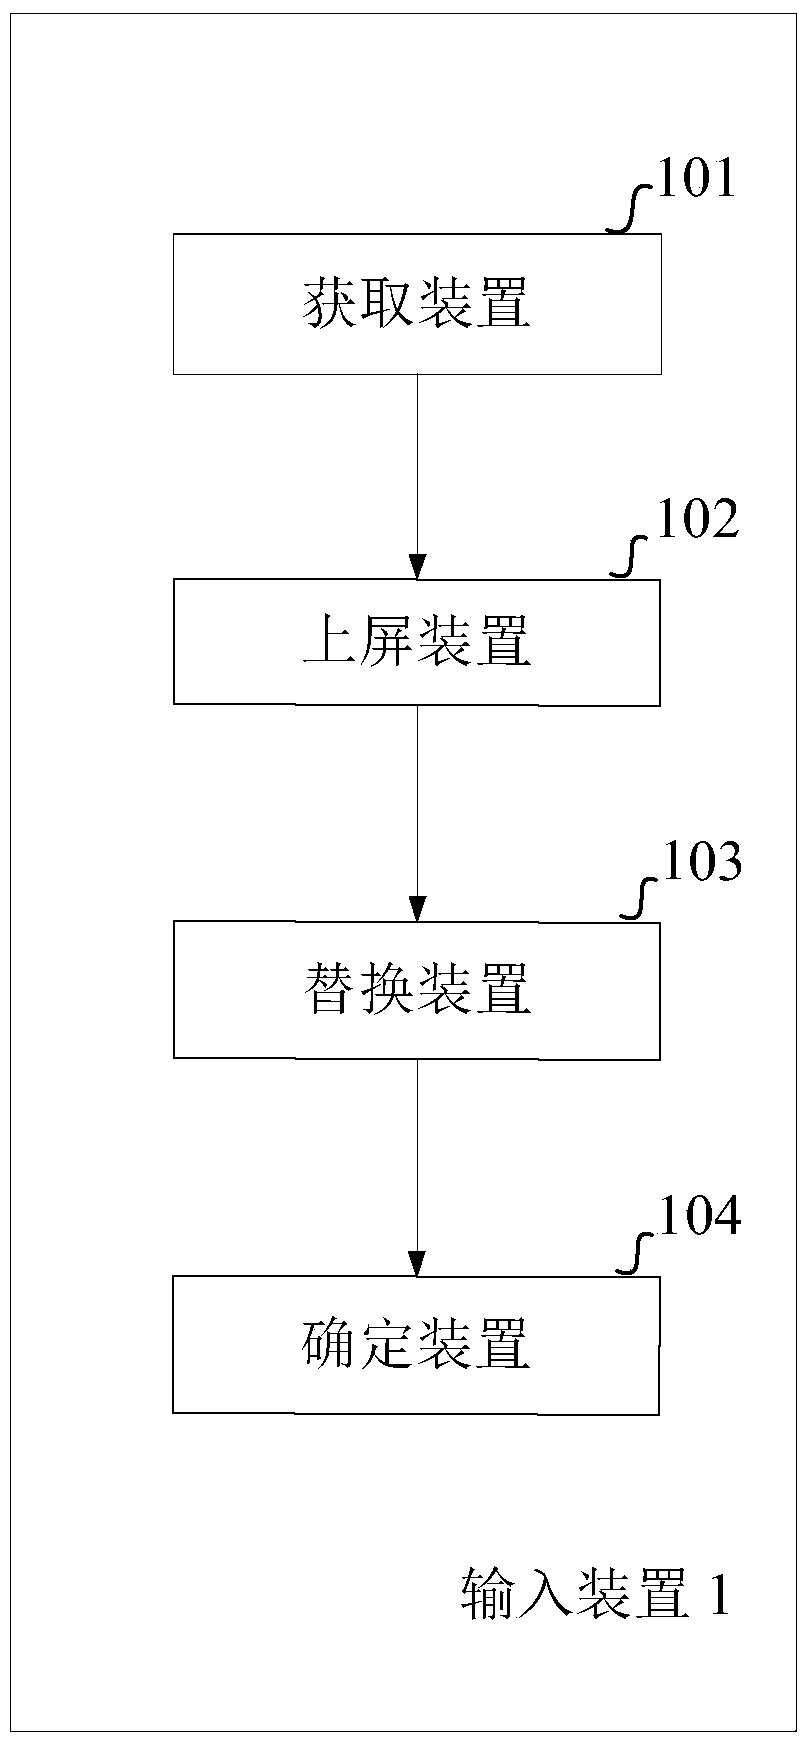 Method and device for Chinese input